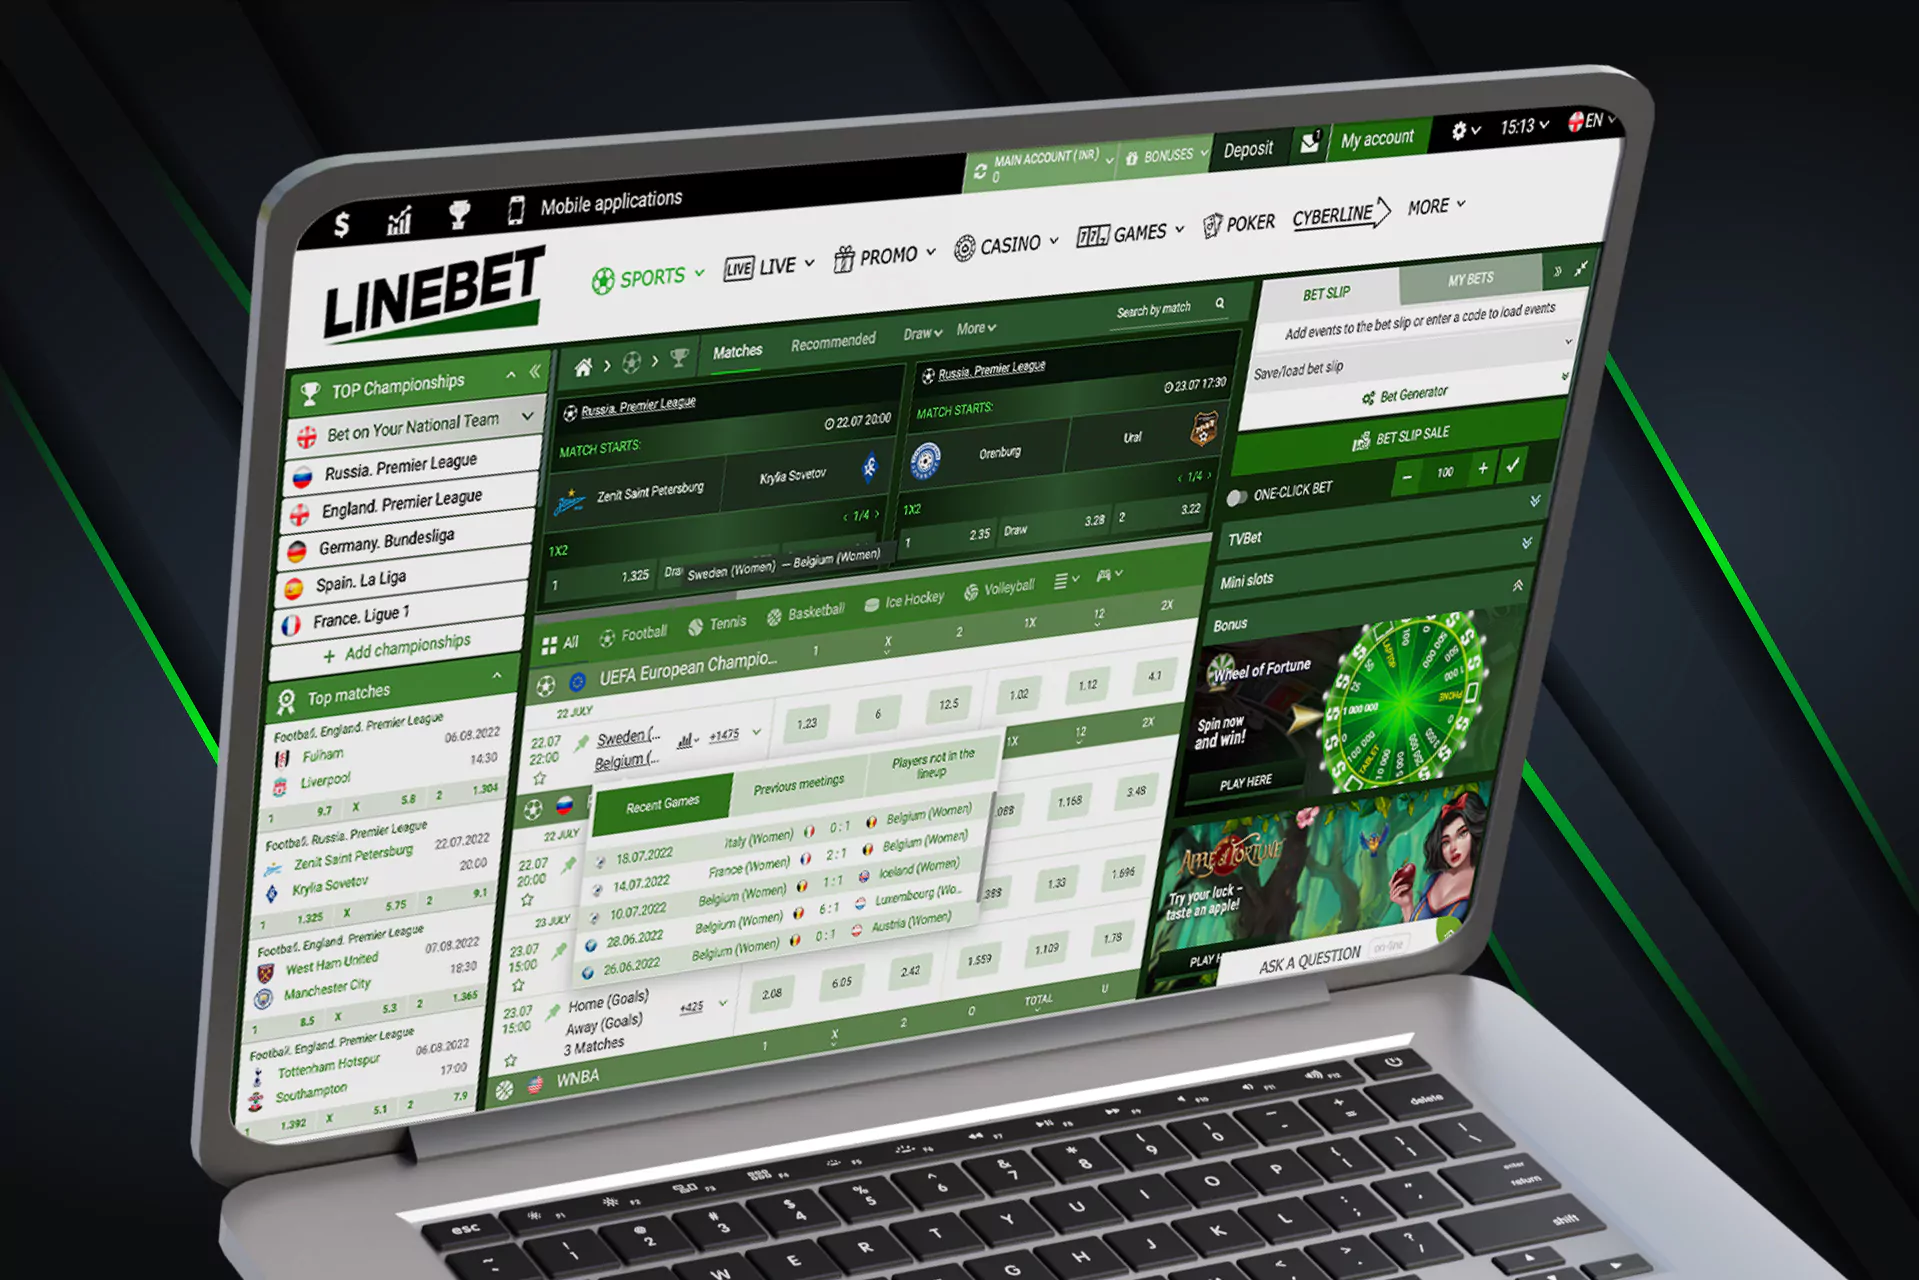 There are a lot of betting options and casino games at LineBet.